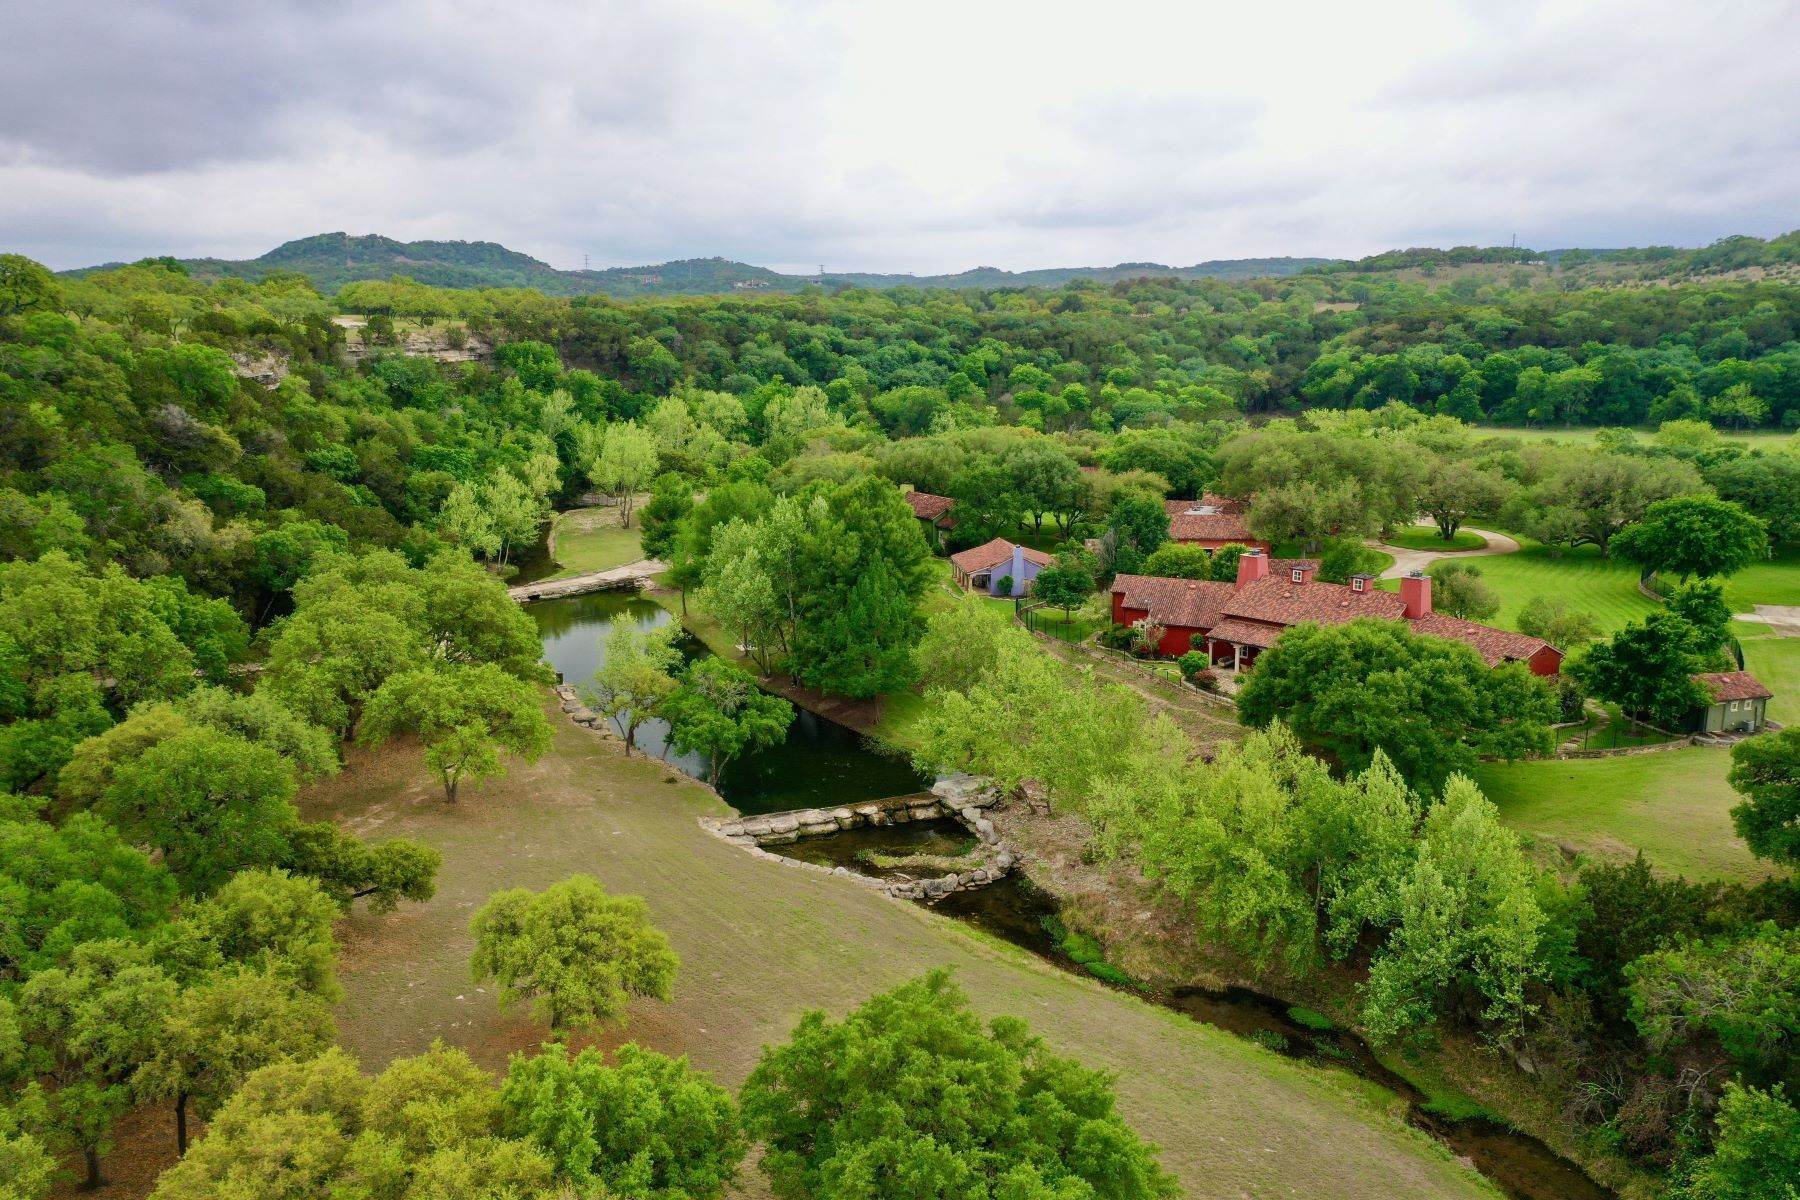 Farm and Ranch Properties for Sale at 138+/- Acres, Kendall County , Boerne, TX 78006 138+/- Acres, Kendall County, Arroyo Vista Boerne, Texas 78006 United States